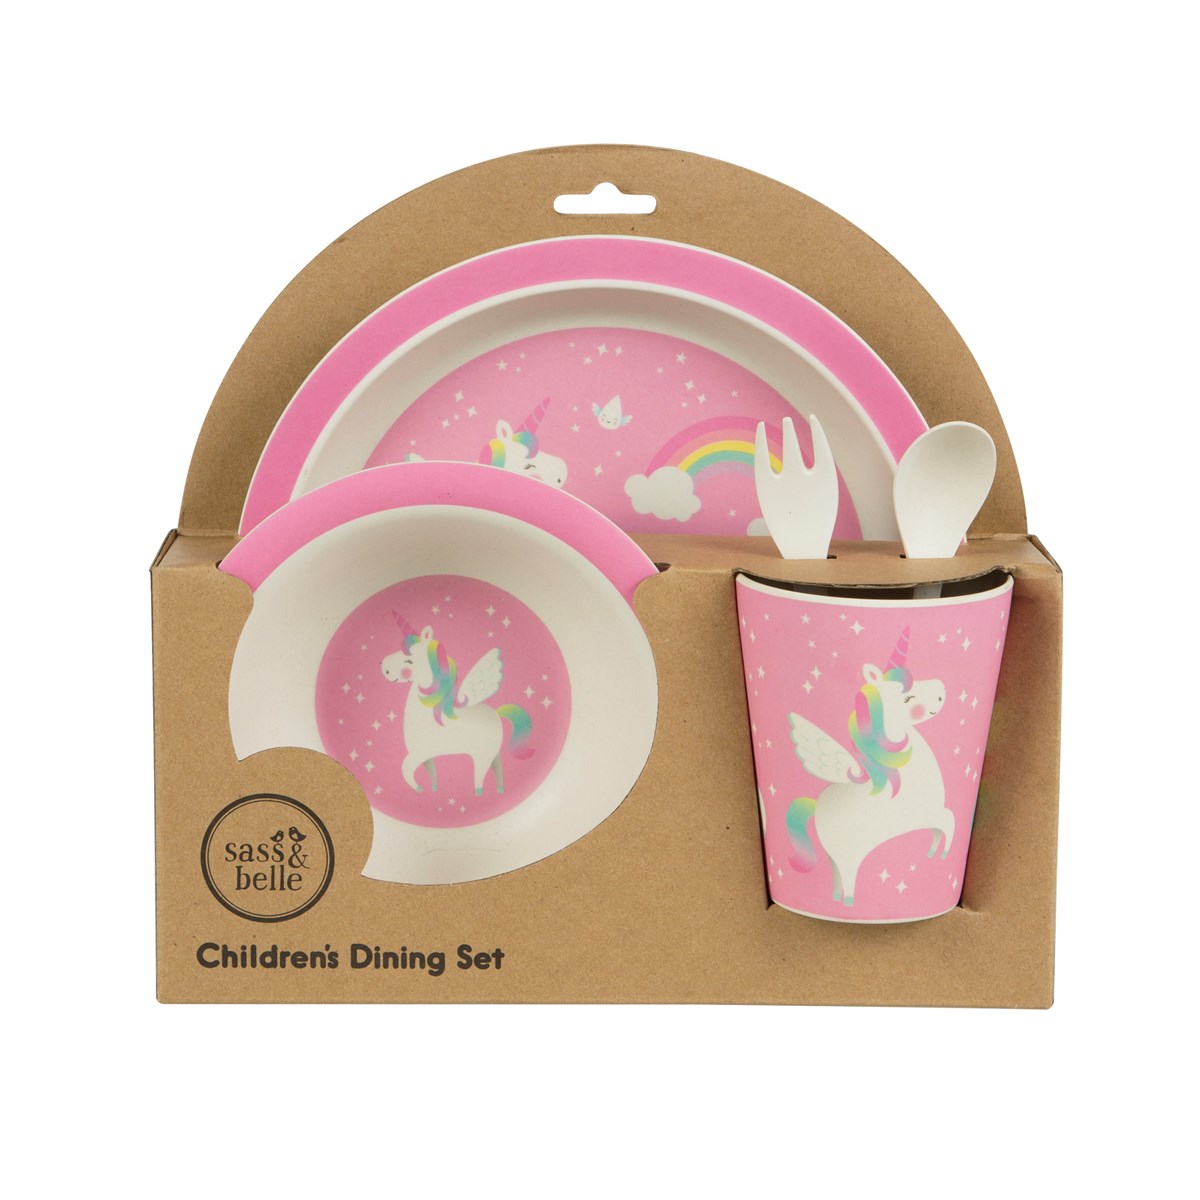 Fly away with this bamboo tableware and cutlery set in a pretty pink colour scheme, with a magical rainbow unicorn themed design.